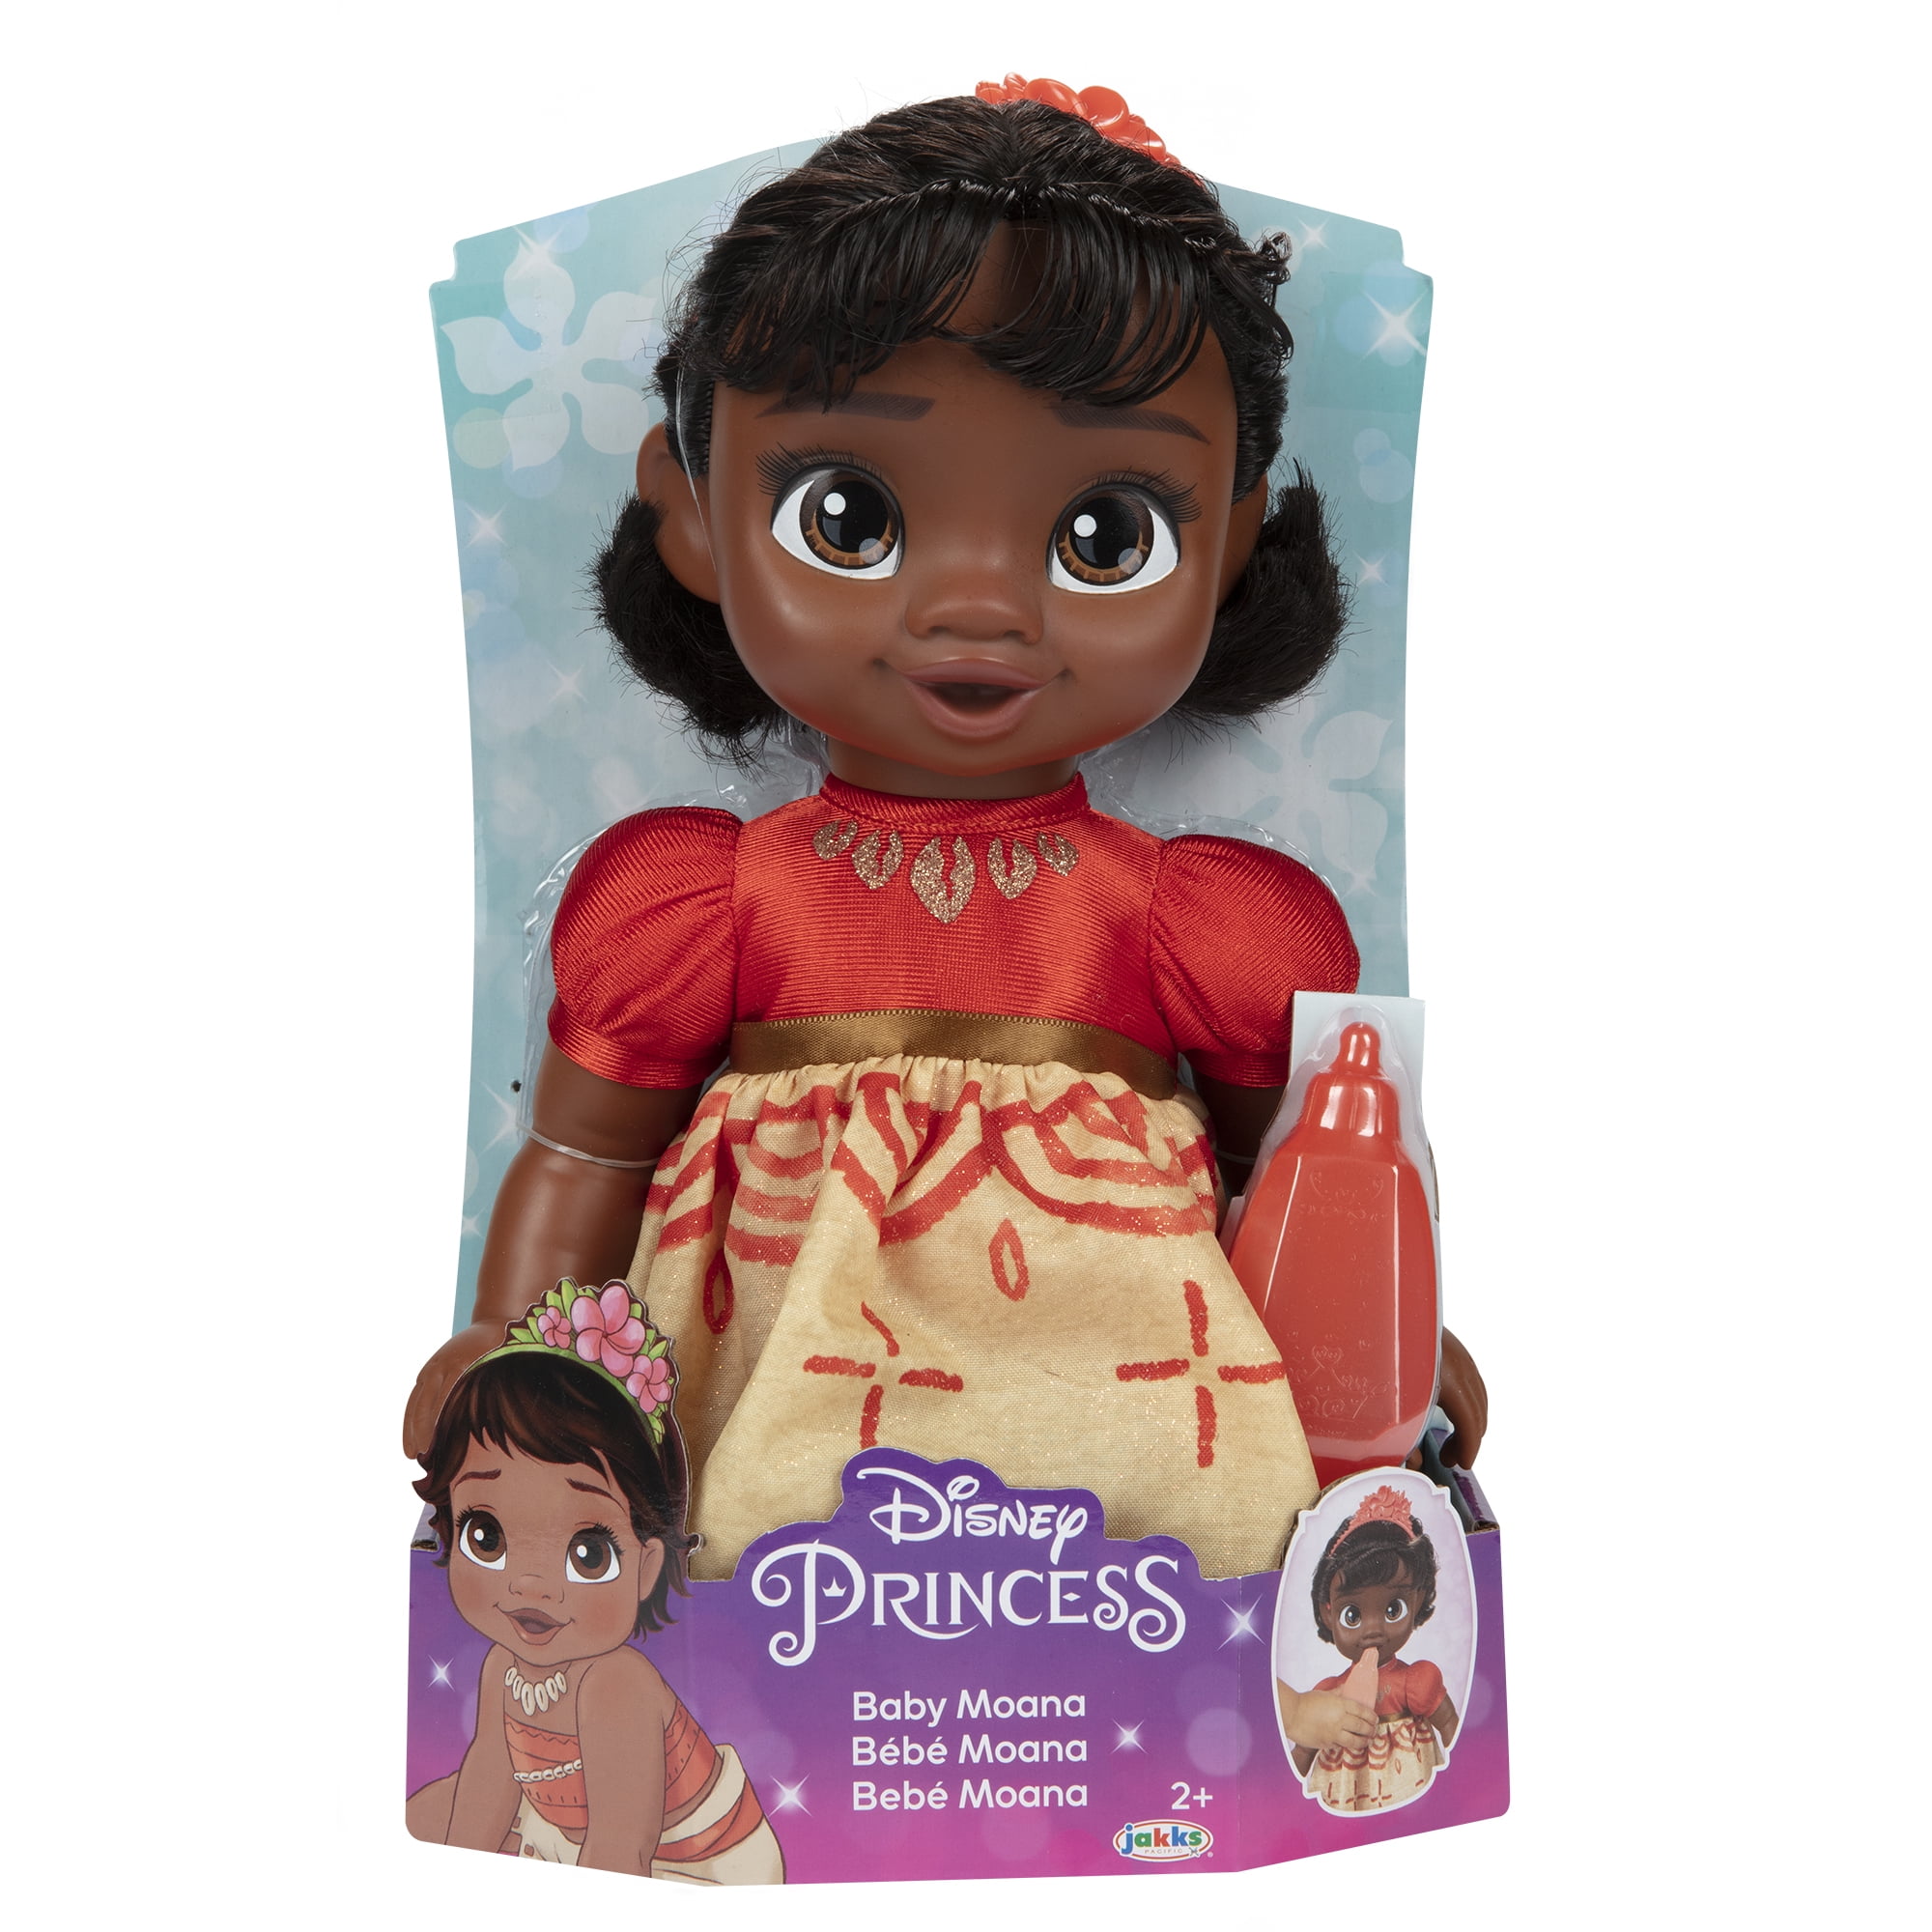 Disney Princess Deluxe Moana Baby Doll Includes Tiara and Bottle for Children Ages 2+